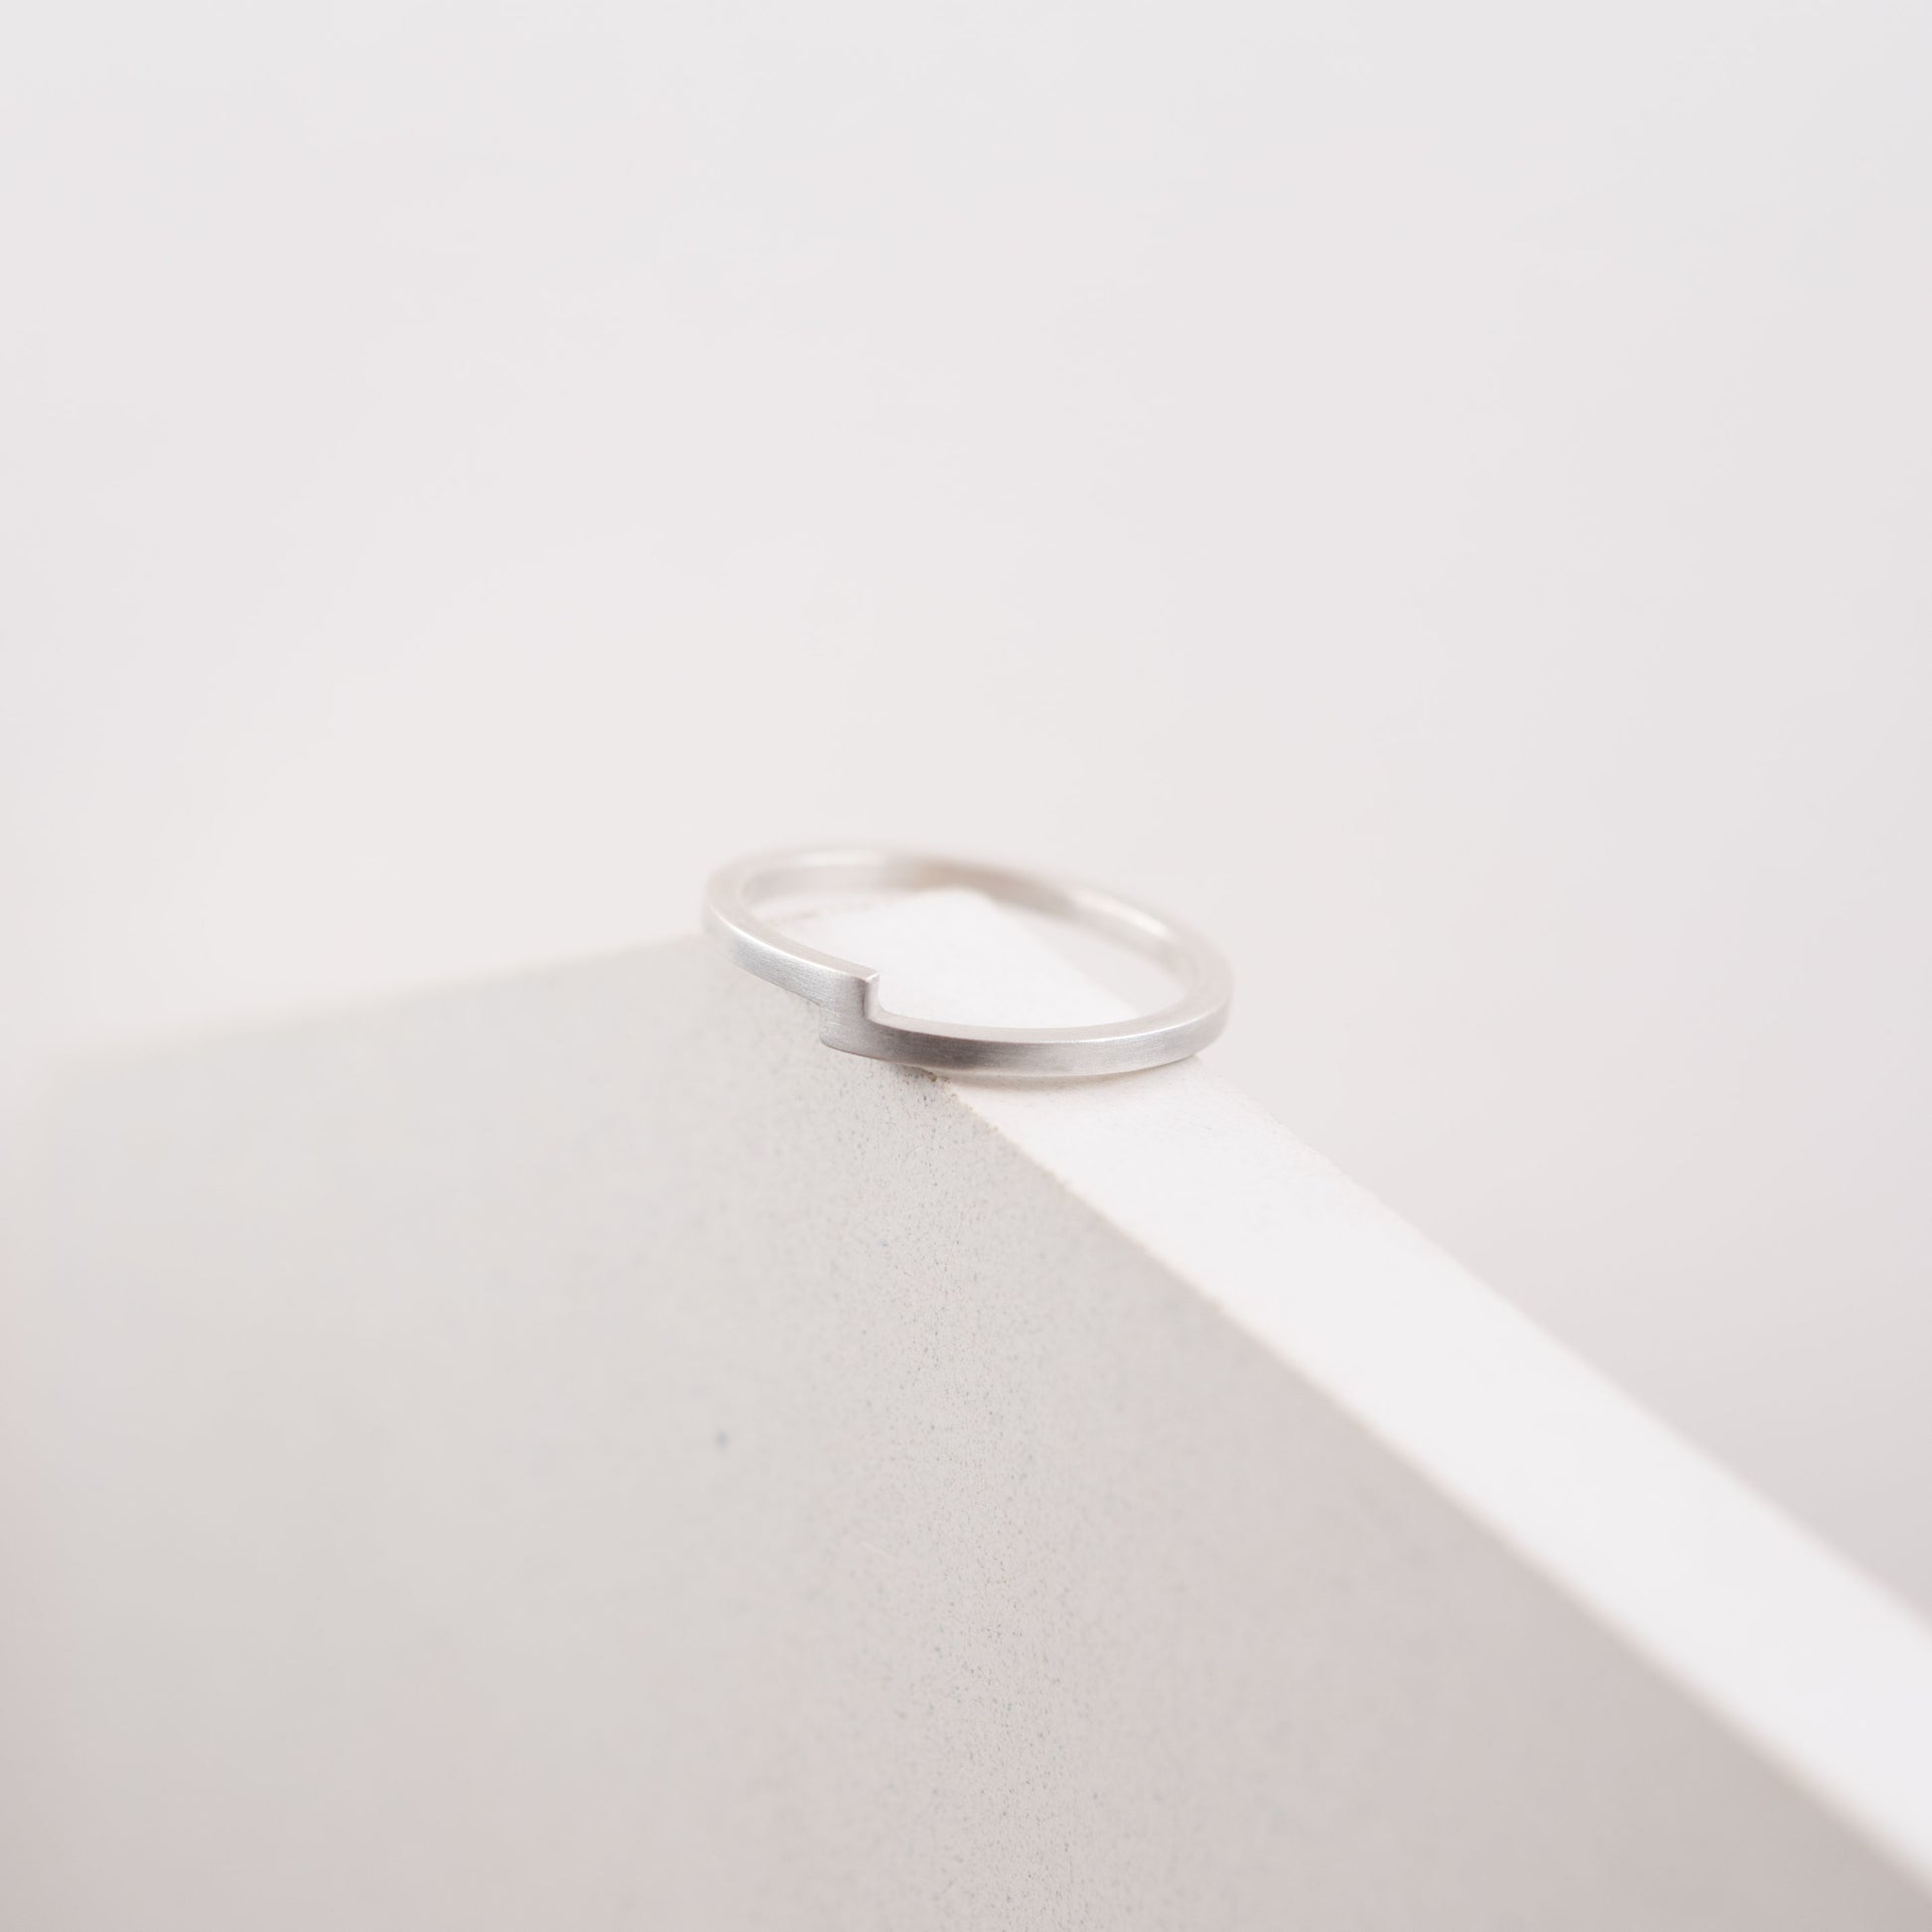 Thin band silver ring. Crafted by hand by a g j c from a 1,5 mm square shape band of solid sterling silver.